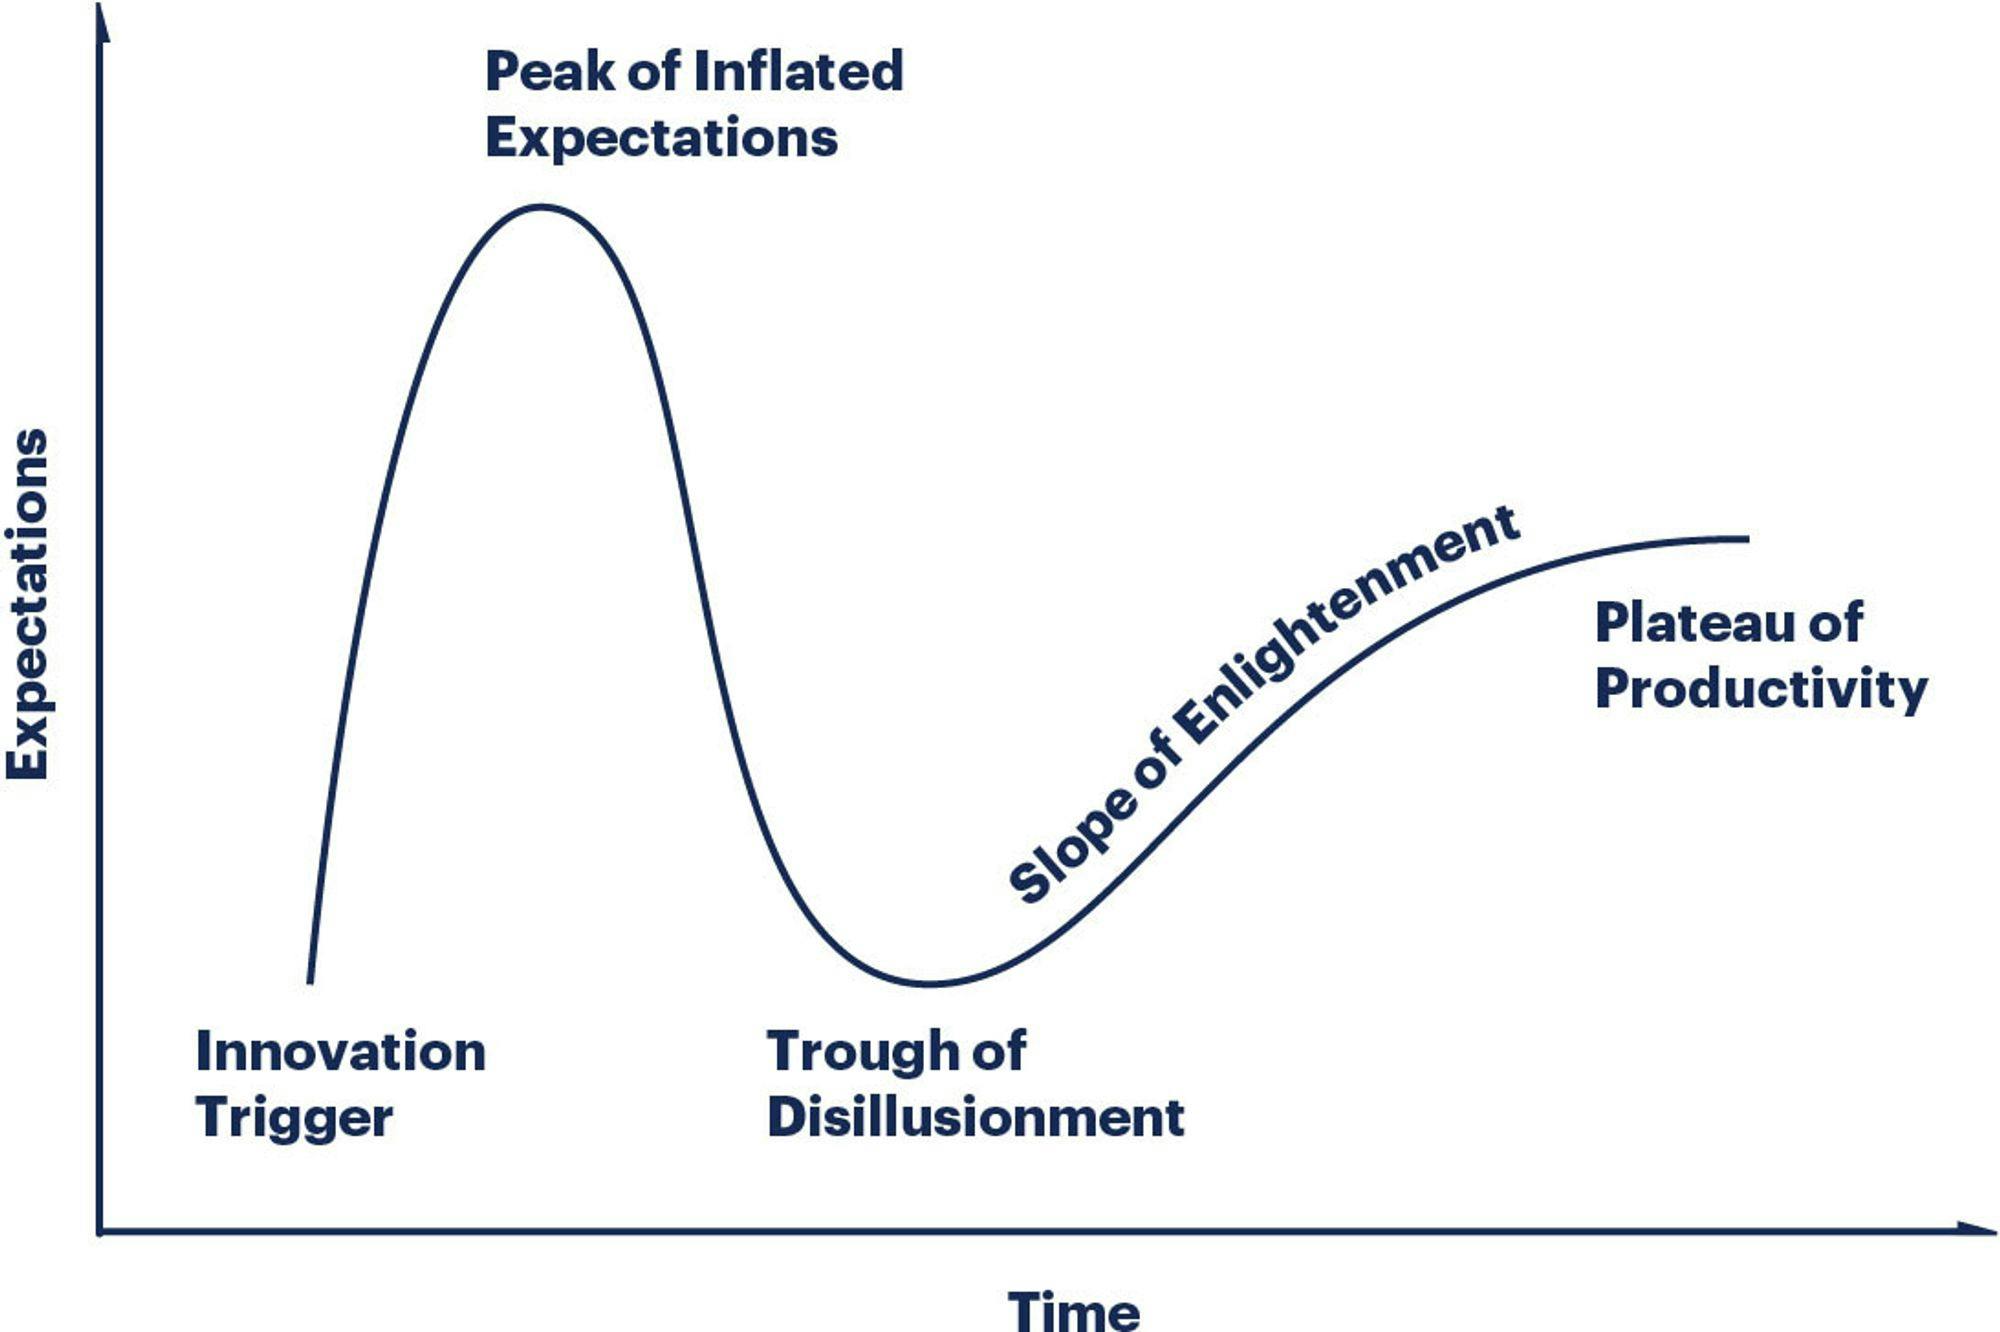 Classic Gartner hype cycle which roughly matches the @ChatGPTBot usage and likely matches OpenAI’s underlying ChatGPT usage as well, though I can’t comment on that for certain.